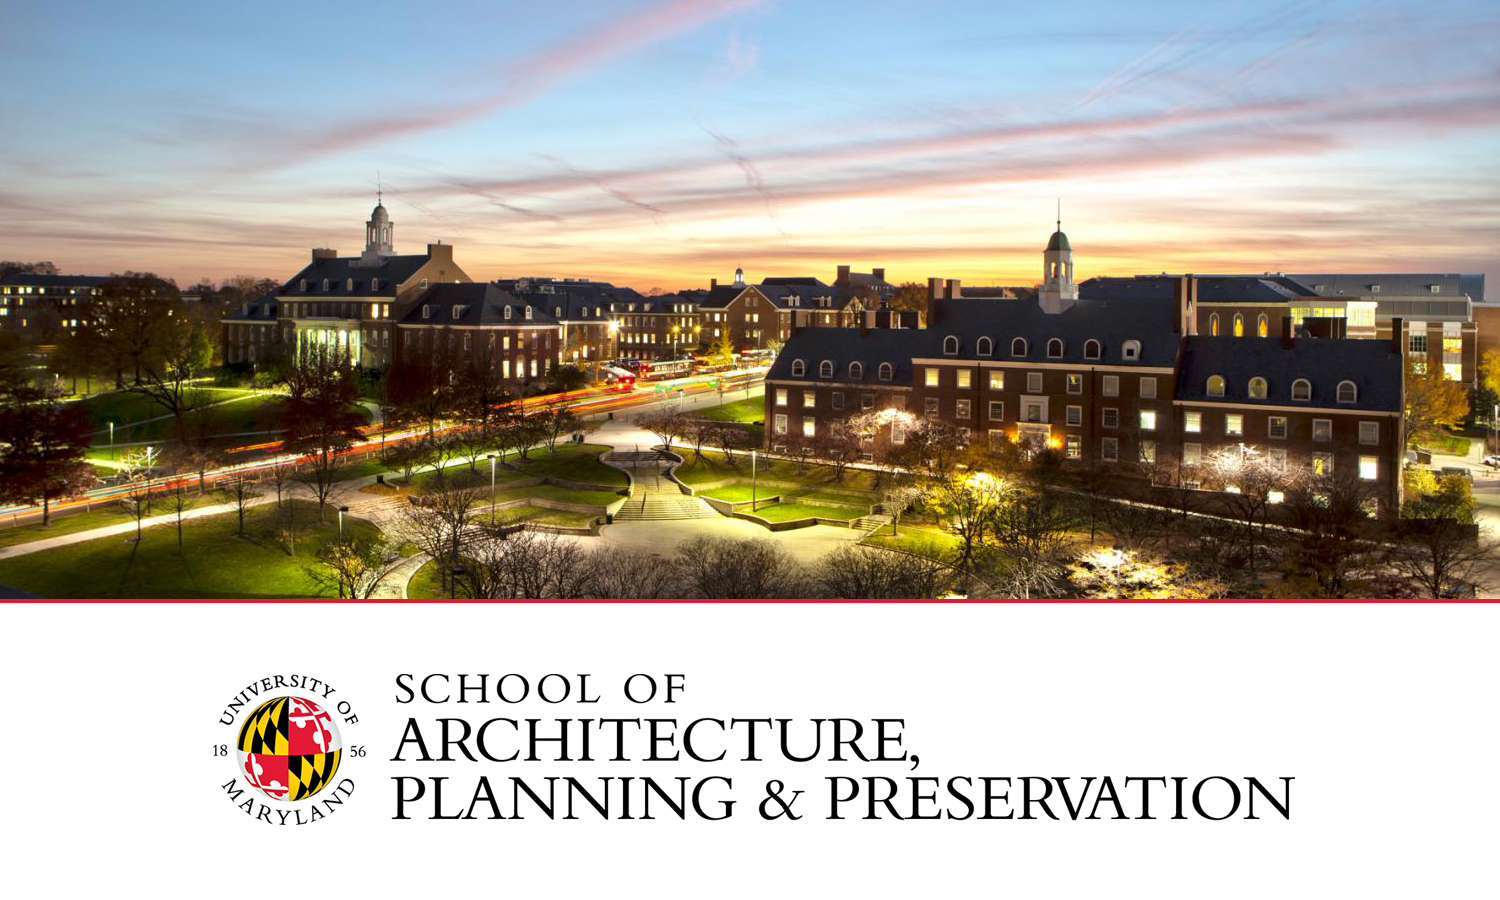 University Of Maryland School Of Architecture Planning And Preservation 